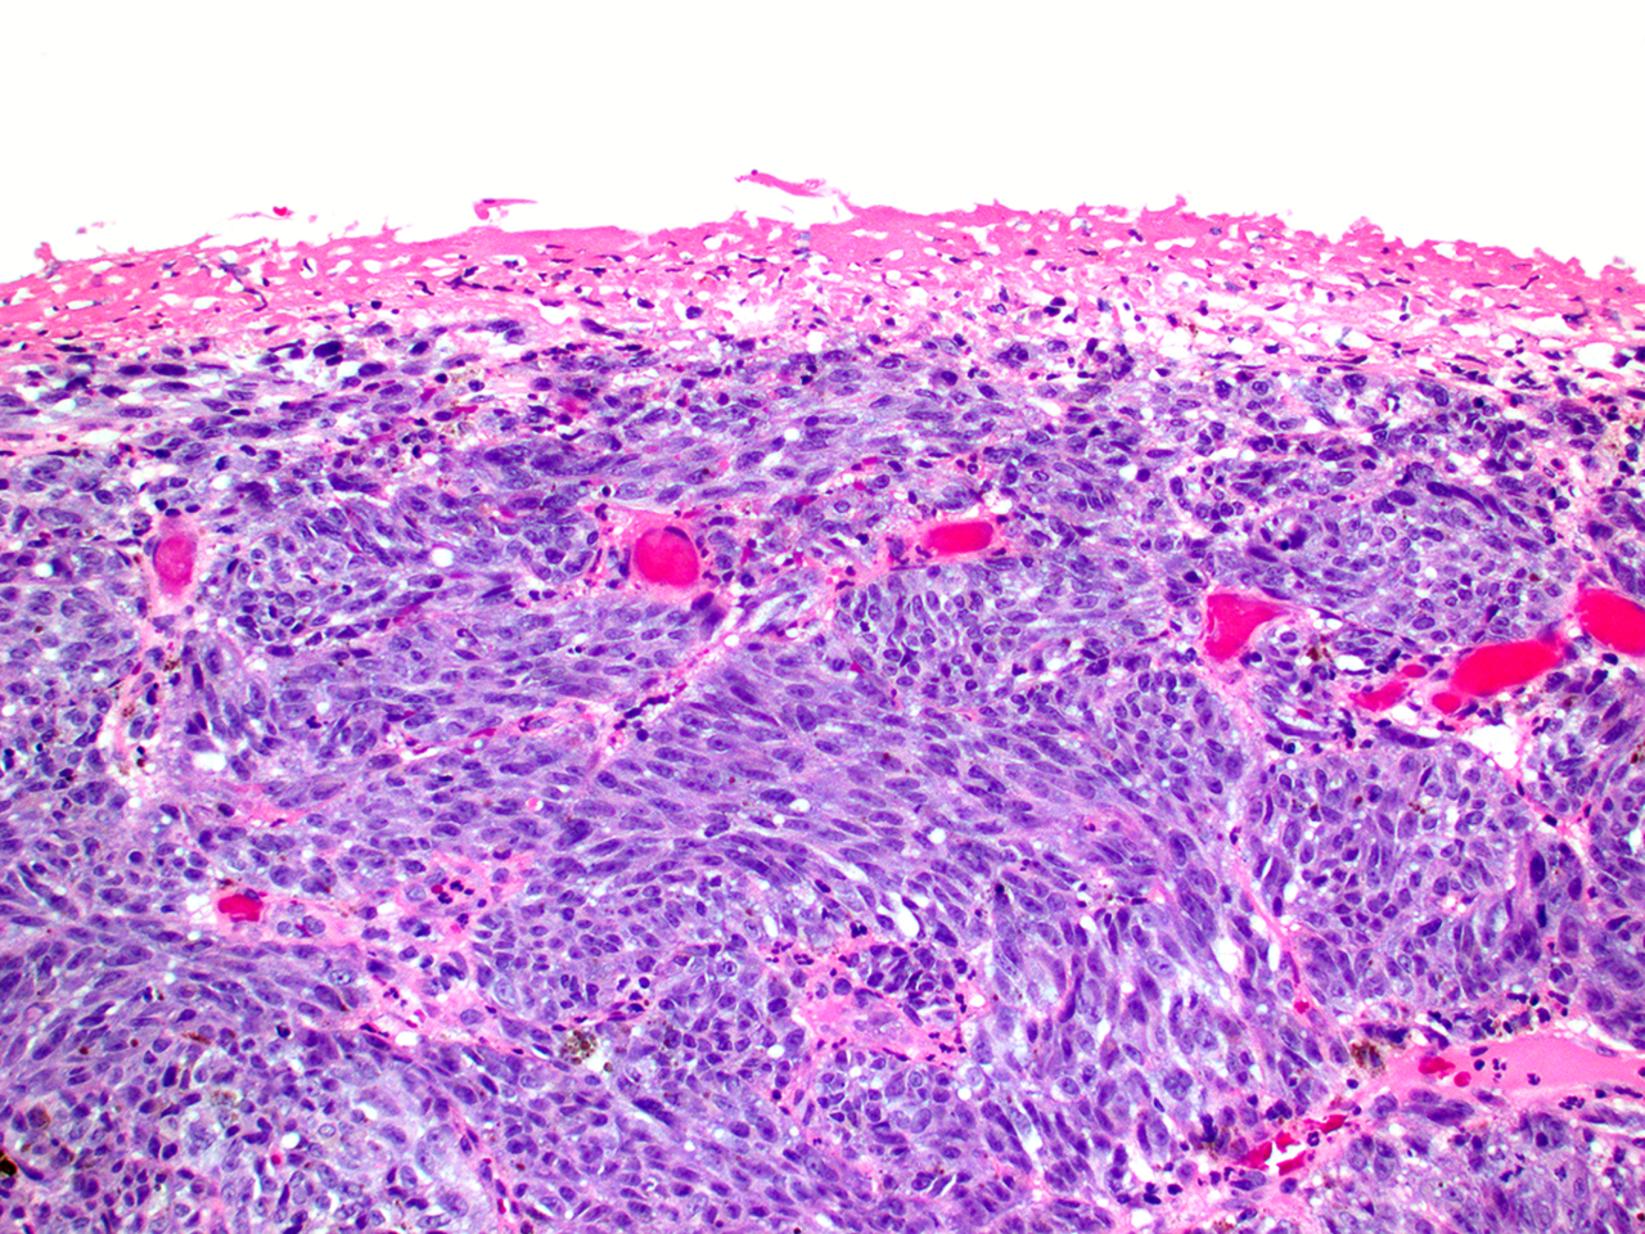 Fig. 17.8, Primary vulvar melanoma with spindled cytology and extensive ulceration.